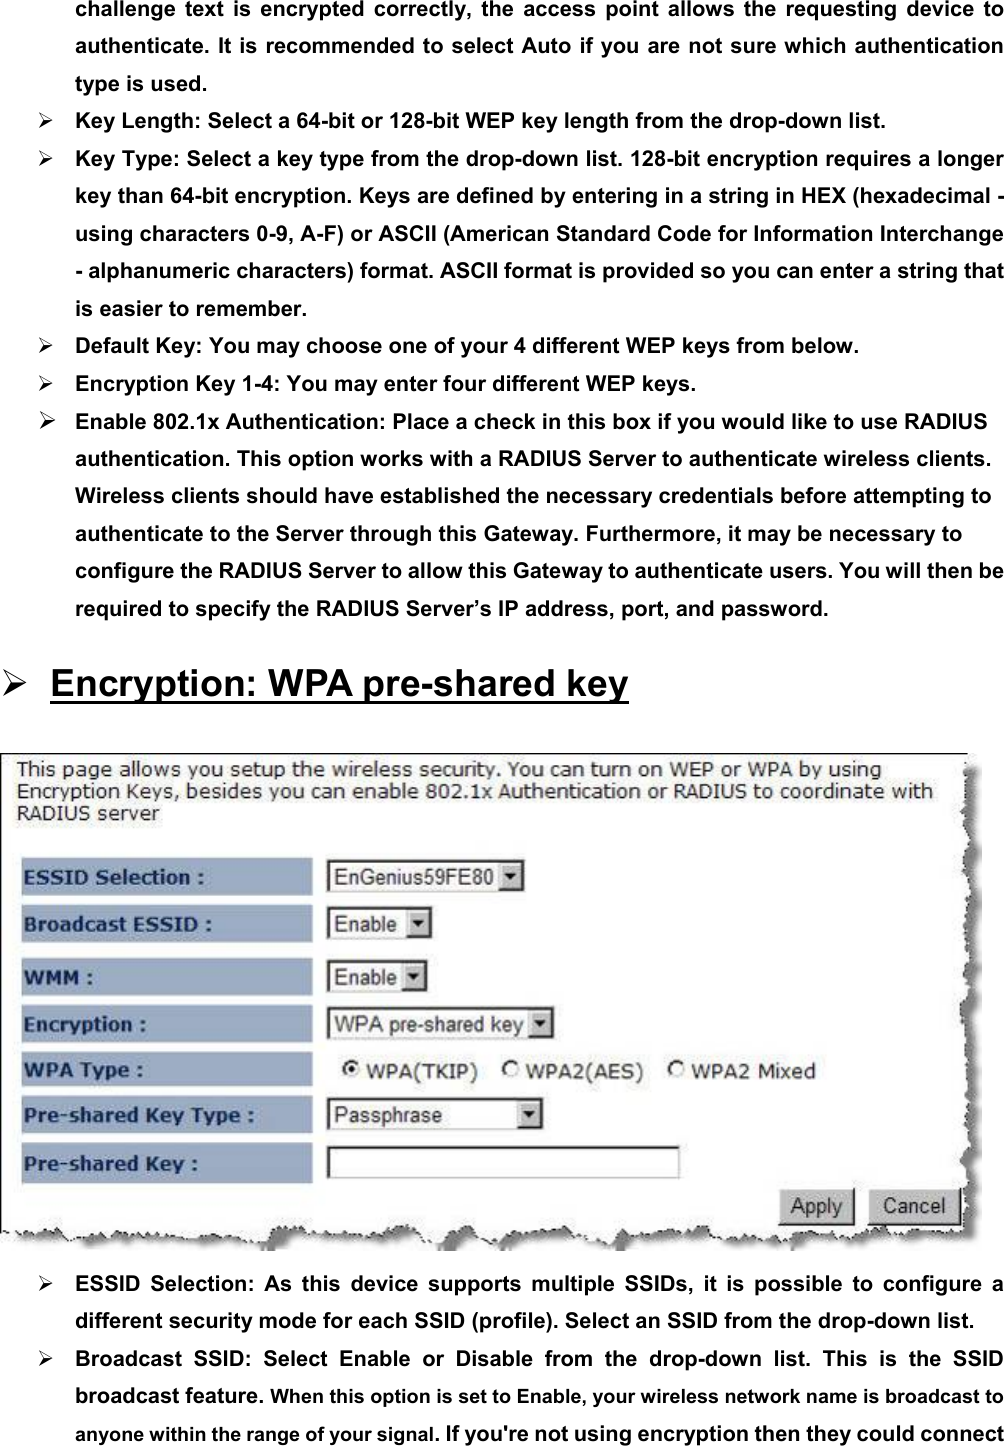 challenge text is encrypted correctly, the access point allows the requesting device to authenticate. It is recommended to select Auto if you are not sure which authentication type is used. ¾ Key Length: Select a 64-bit or 128-bit WEP key length from the drop-down list.   ¾ Key Type: Select a key type from the drop-down list. 128-bit encryption requires a longer key than 64-bit encryption. Keys are defined by entering in a string in HEX (hexadecimal - using characters 0-9, A-F) or ASCII (American Standard Code for Information Interchange - alphanumeric characters) format. ASCII format is provided so you can enter a string that is easier to remember. ¾ Default Key: You may choose one of your 4 different WEP keys from below.   ¾ Encryption Key 1-4: You may enter four different WEP keys.   ¾ Enable 802.1x Authentication: Place a check in this box if you would like to use RADIUS authentication. This option works with a RADIUS Server to authenticate wireless clients. Wireless clients should have established the necessary credentials before attempting to authenticate to the Server through this Gateway. Furthermore, it may be necessary to configure the RADIUS Server to allow this Gateway to authenticate users. You will then be required to specify the RADIUS Server’s IP address, port, and password. ¾ Encryption: WPA pre-shared key  ¾ ESSID Selection: As this device supports multiple SSIDs, it is possible to configure a different security mode for each SSID (profile). Select an SSID from the drop-down list.   ¾ Broadcast SSID: Select Enable or Disable from the drop-down list. This is the SSID broadcast feature. When this option is set to Enable, your wireless network name is broadcast to anyone within the range of your signal. If you&apos;re not using encryption then they could connect 